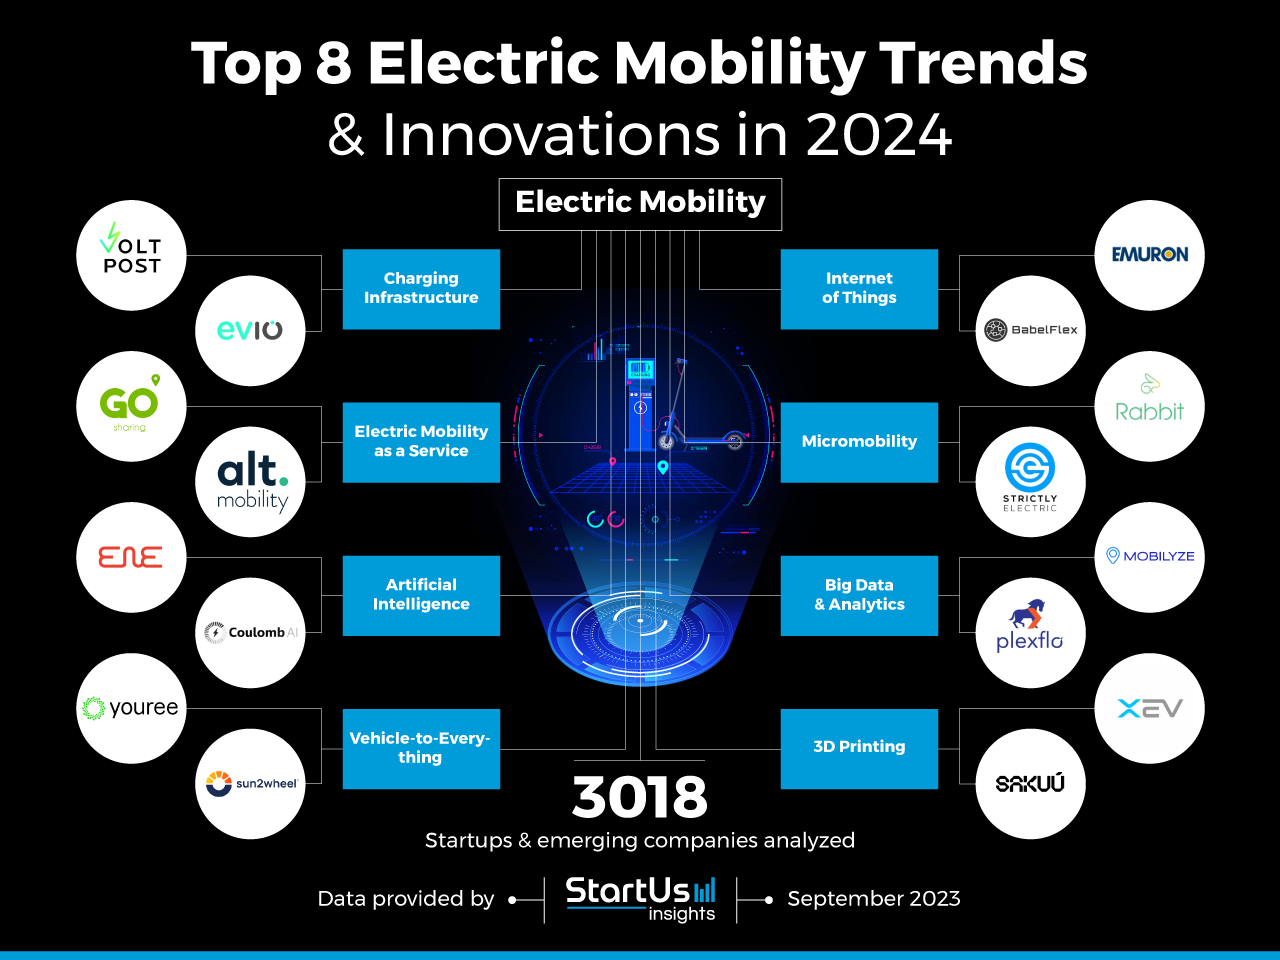 Top 8 Electric Mobility Trends in 2024